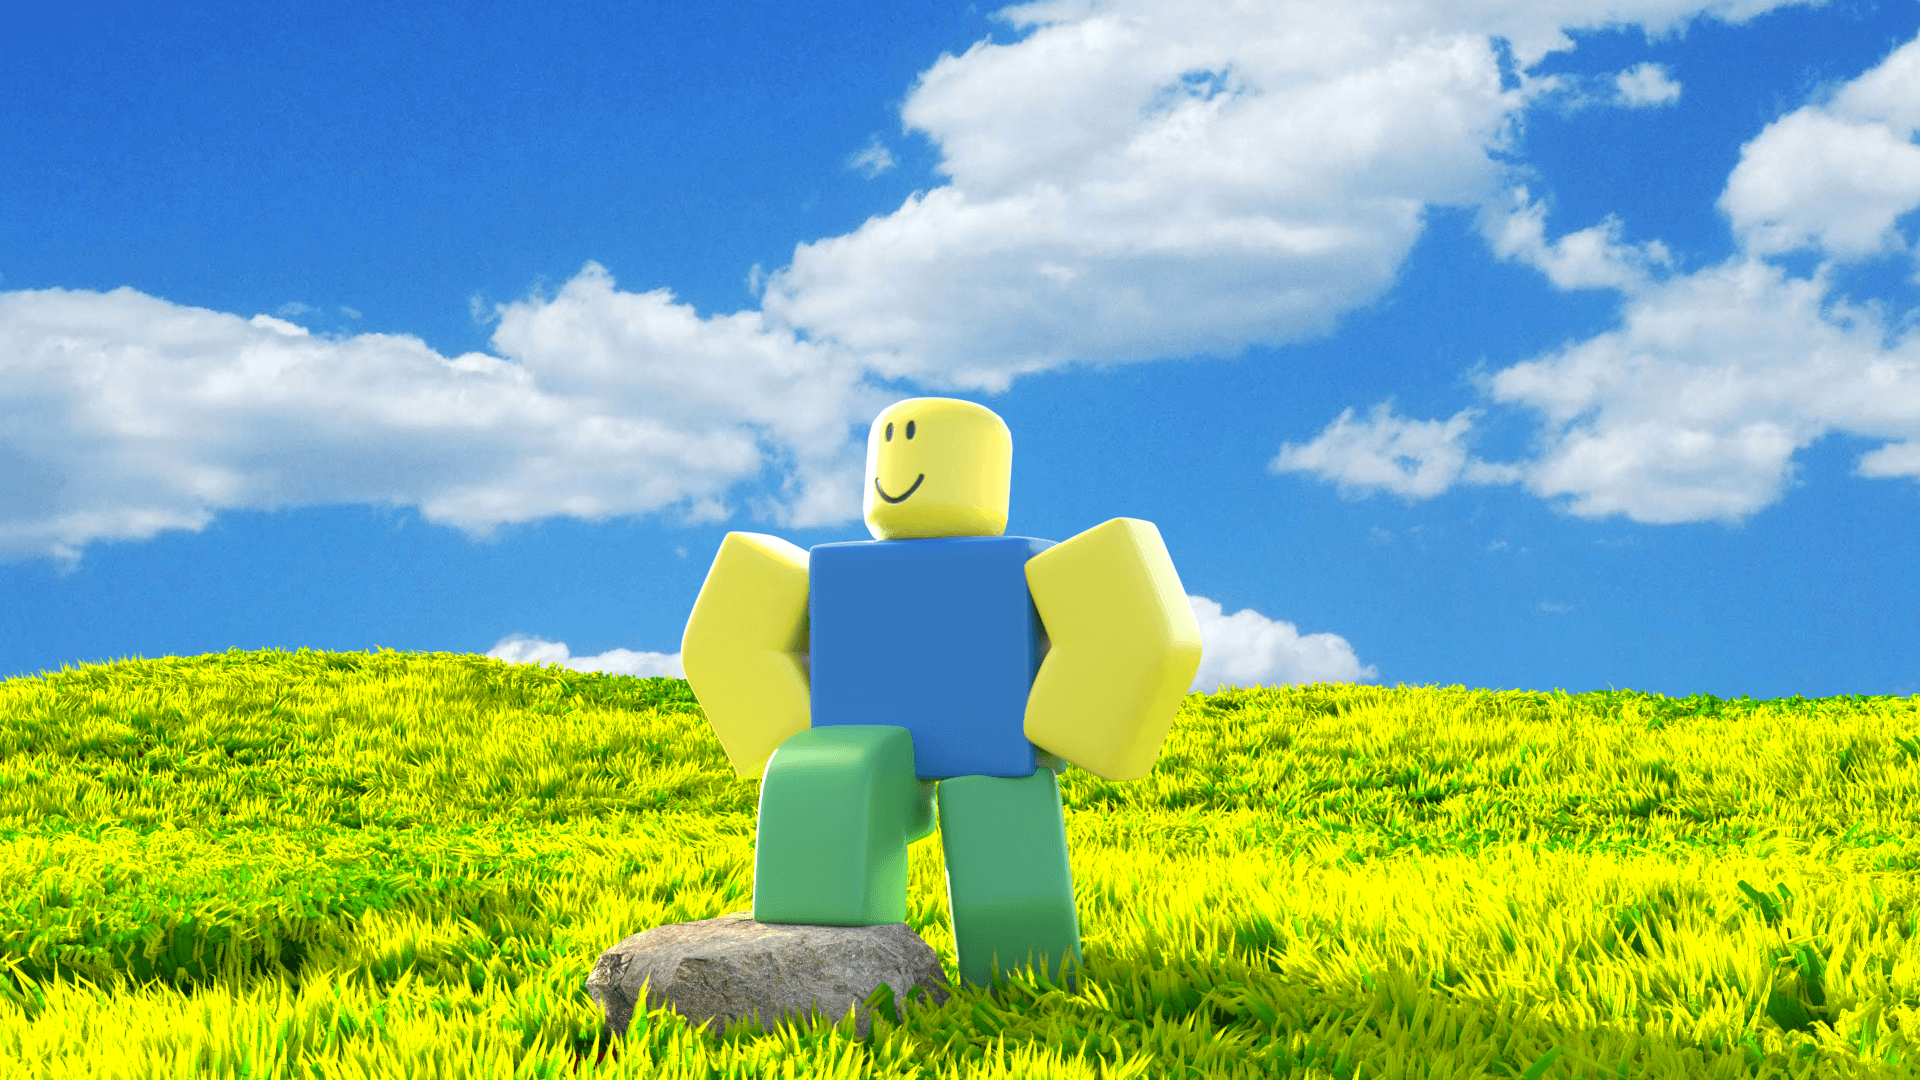 Roblox Gfx Wallpapers Top Free Roblox Gfx Backgrounds Images